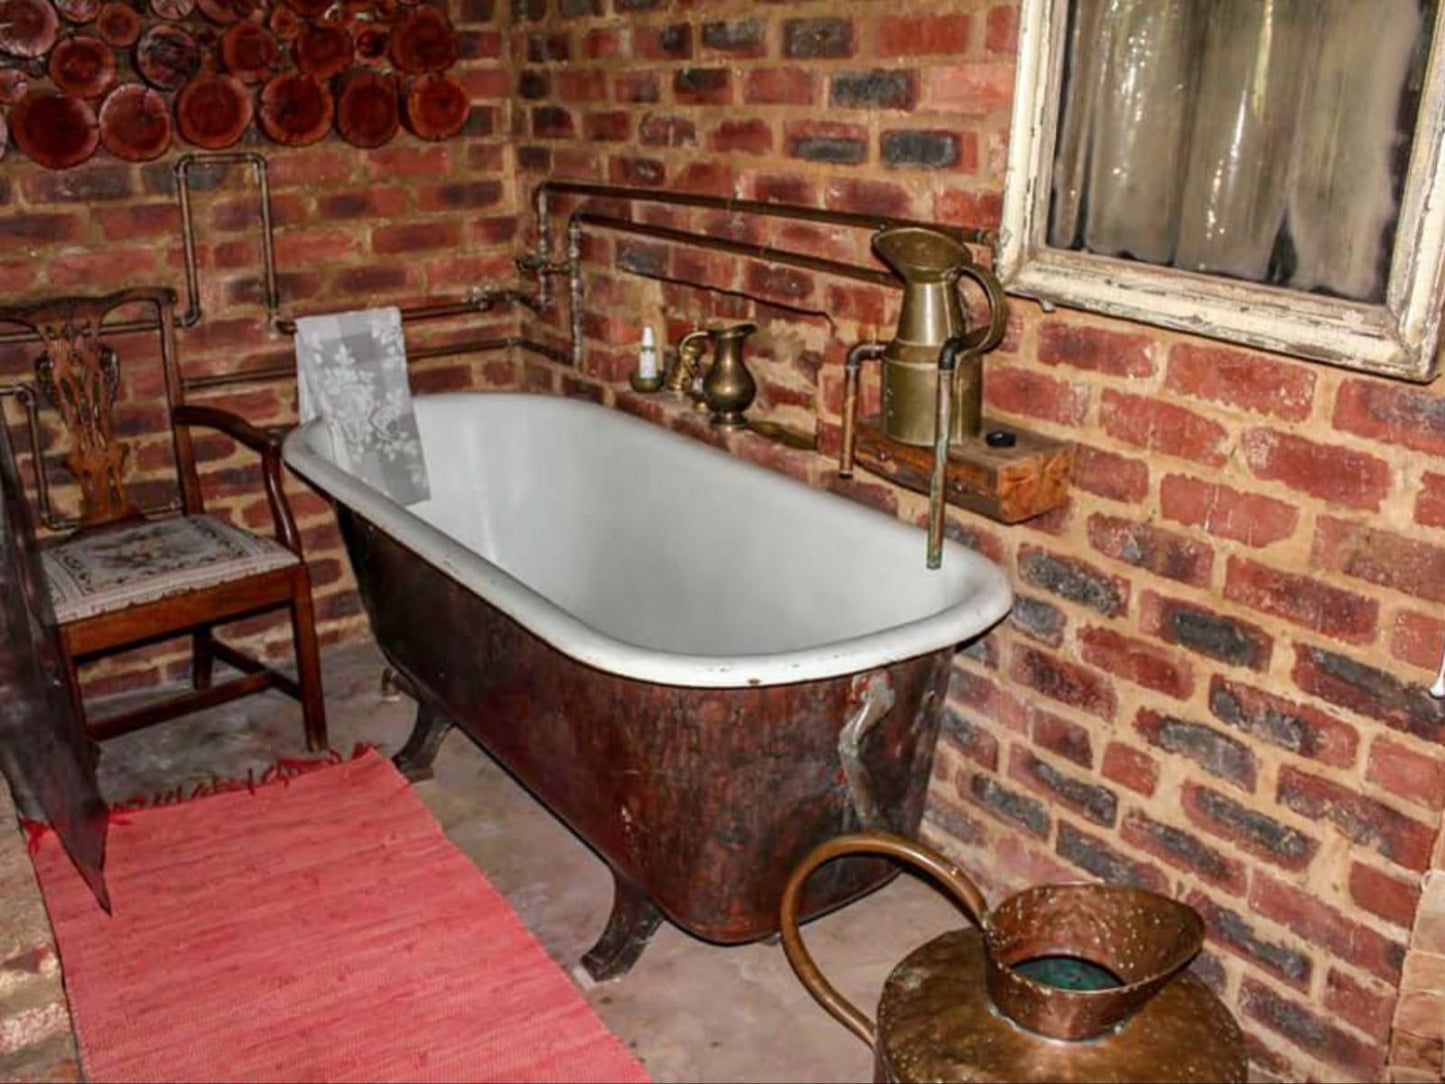 The Ancient Copper Shed Potchefstroom North West Province South Africa Bathroom, Brick Texture, Texture